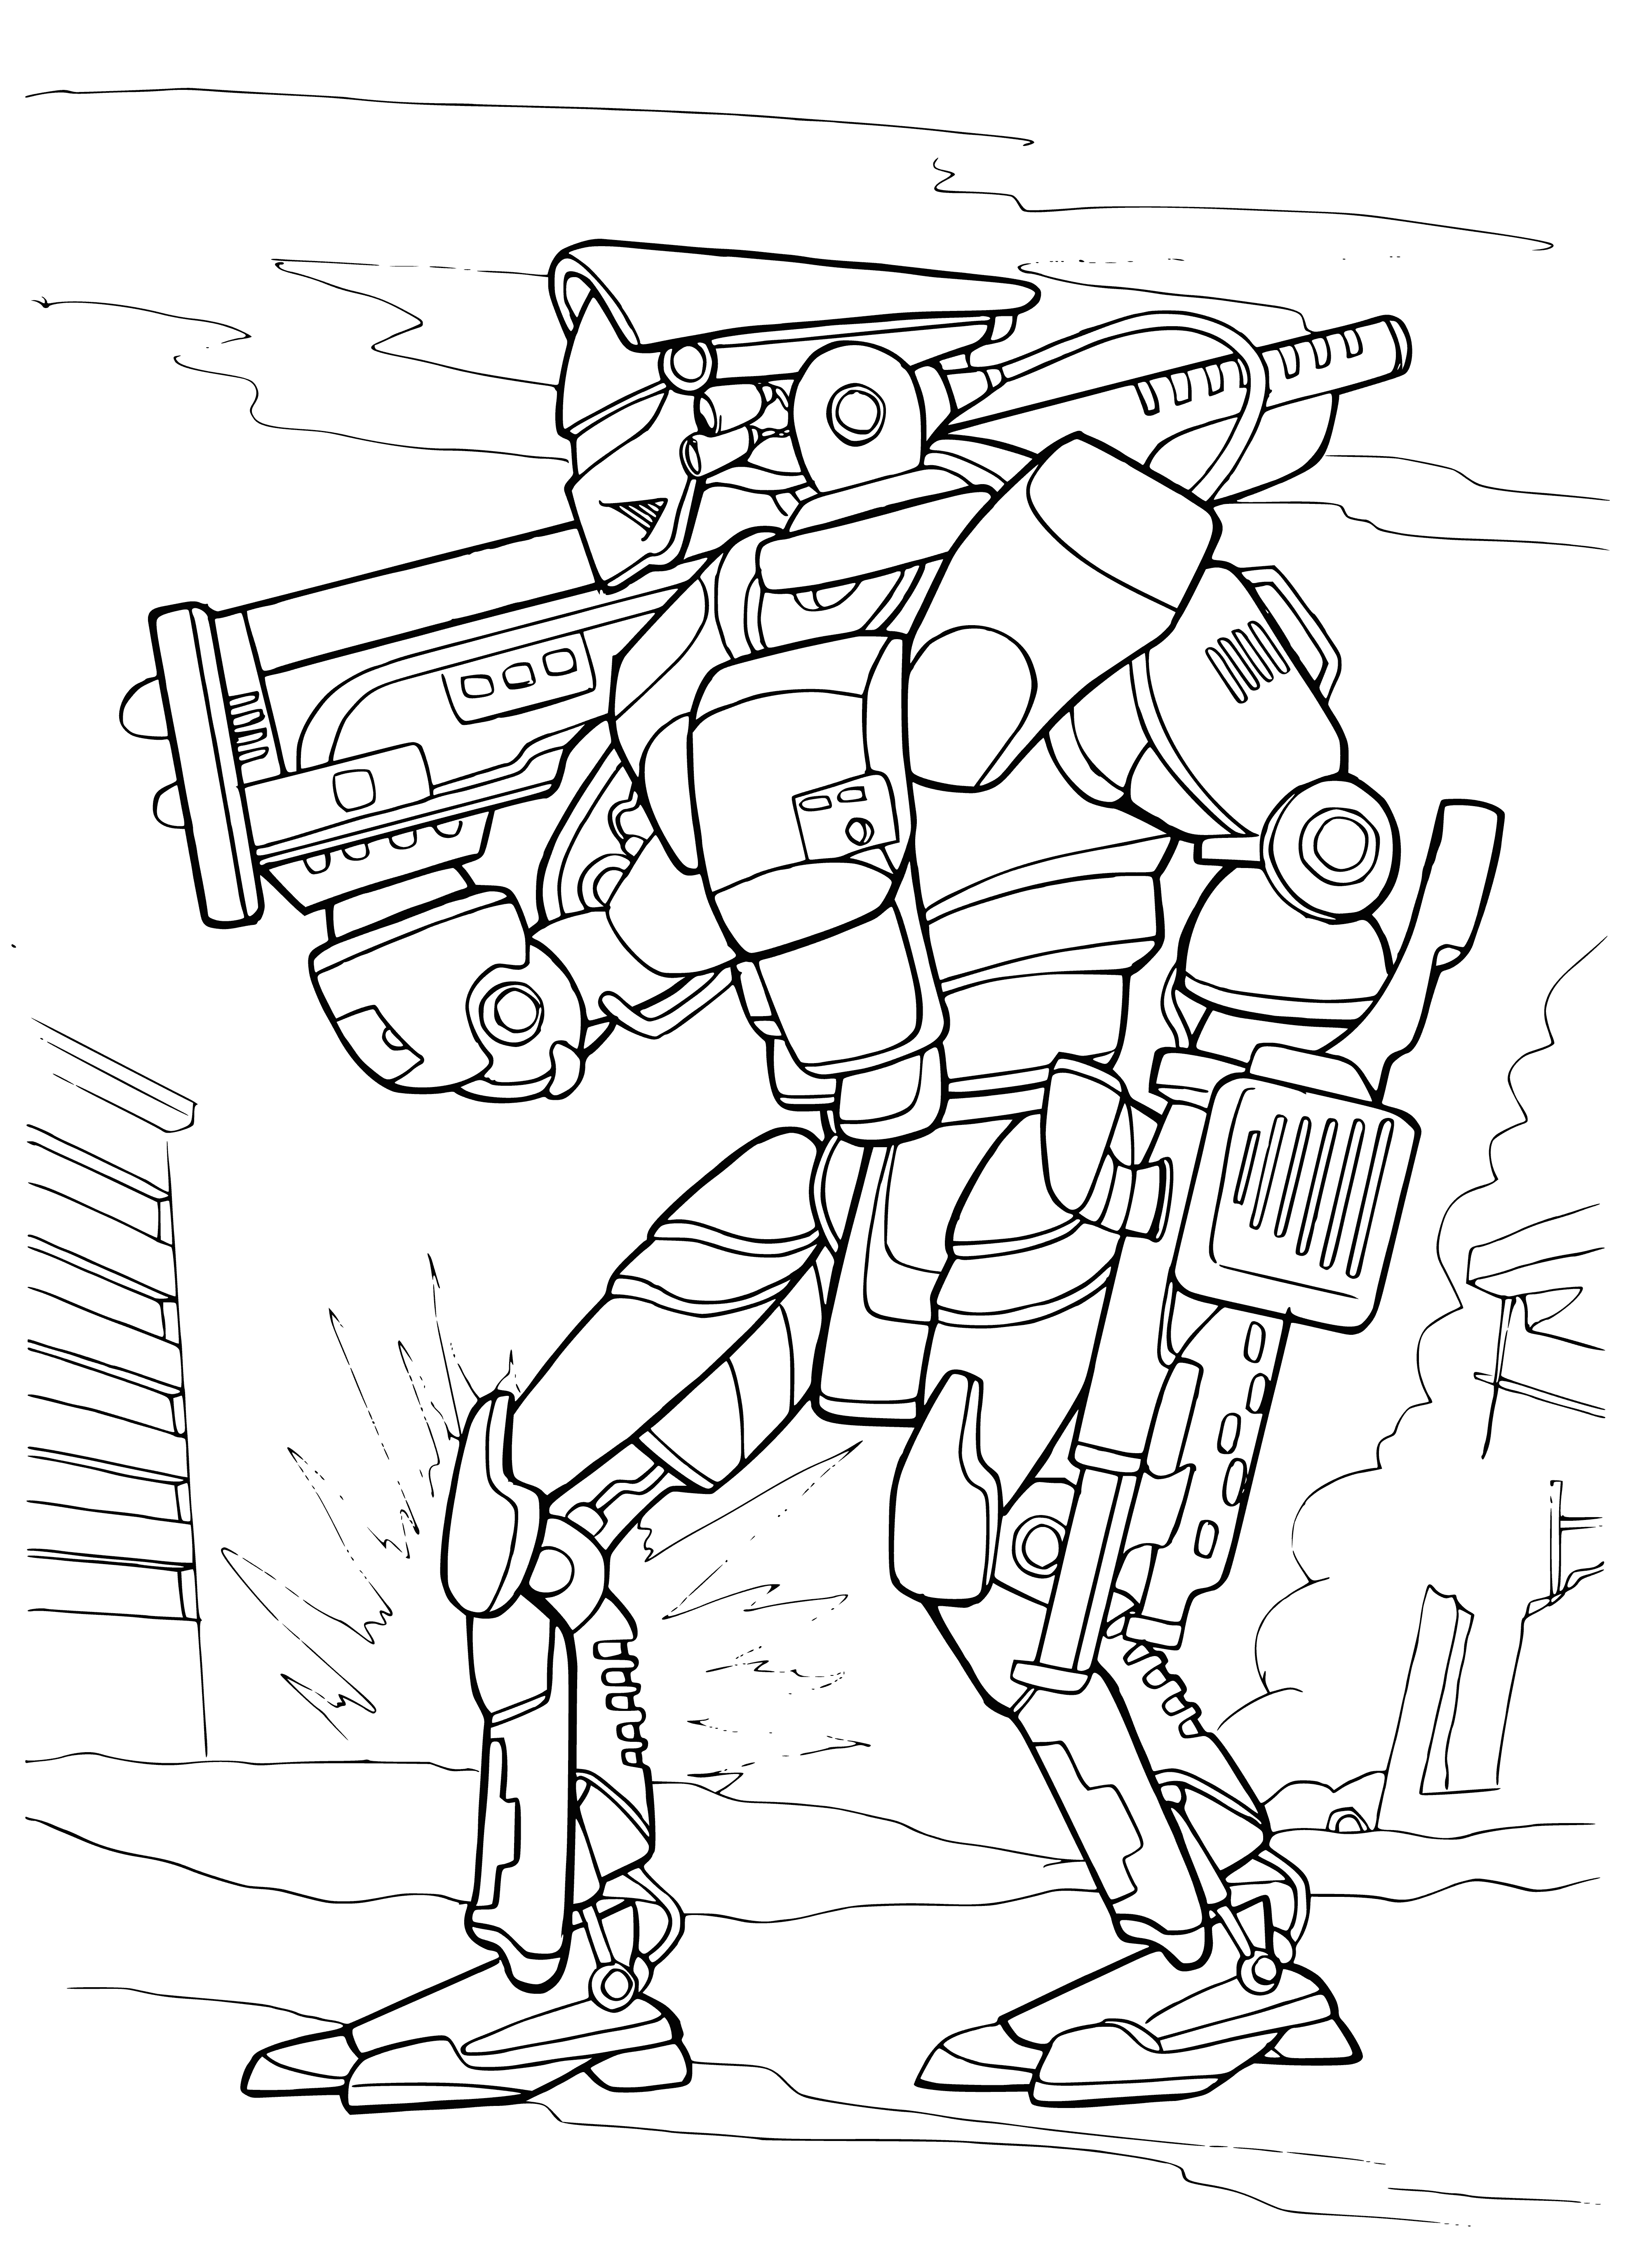 Robotic infantry coloring page